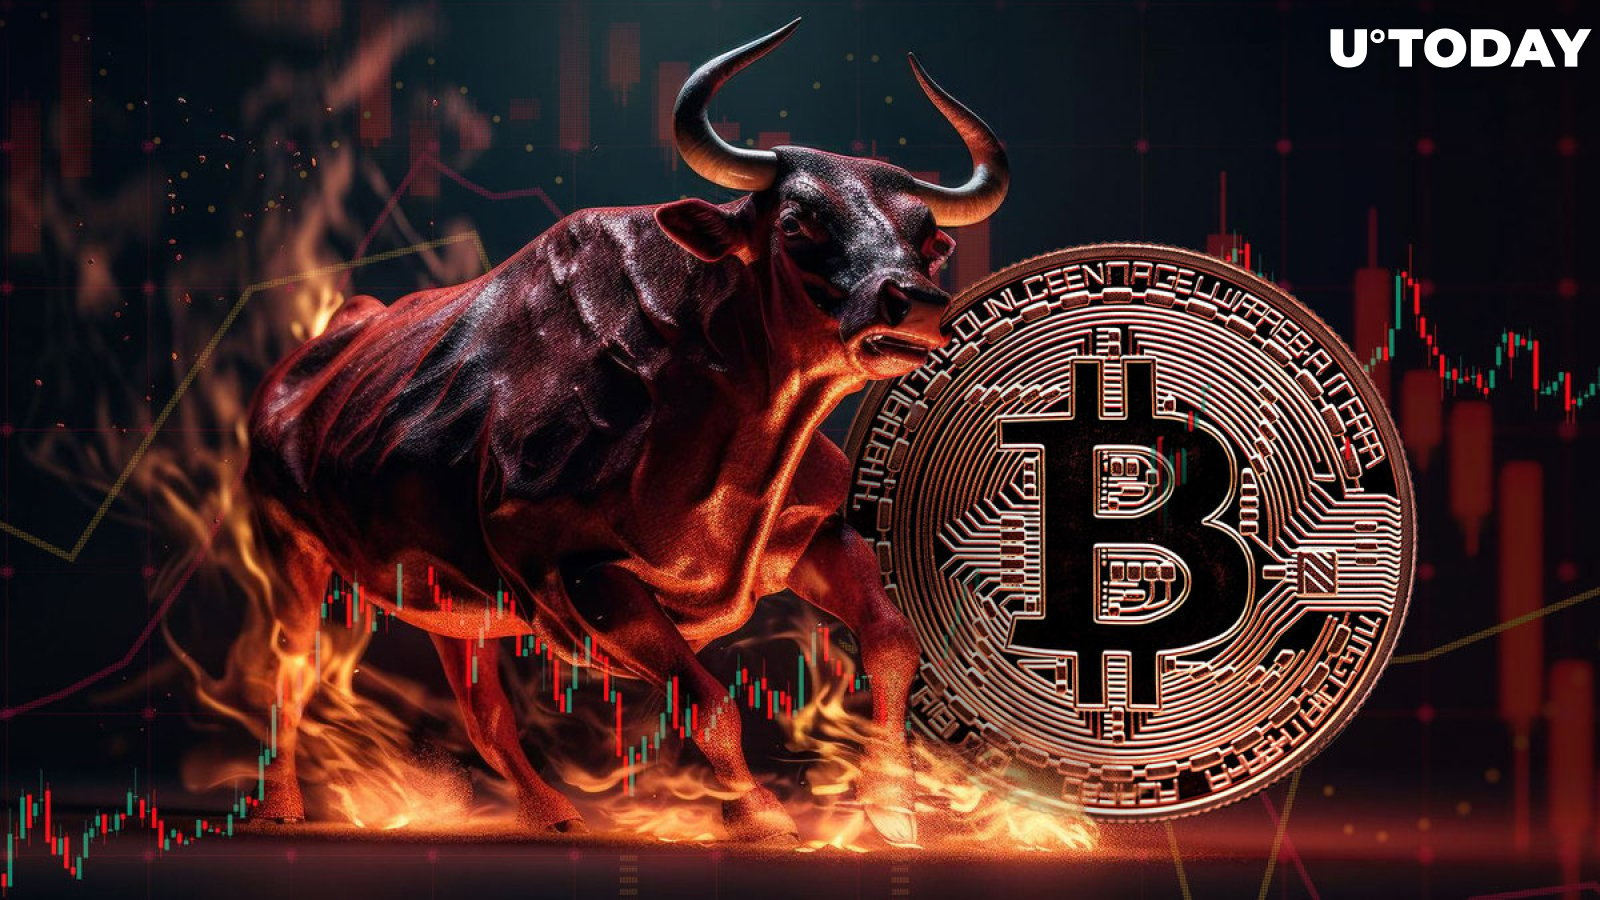 Bitcoin Price Prediction: Bulls Hold Tight as Top Analyst Eyes $37,500 per BTC